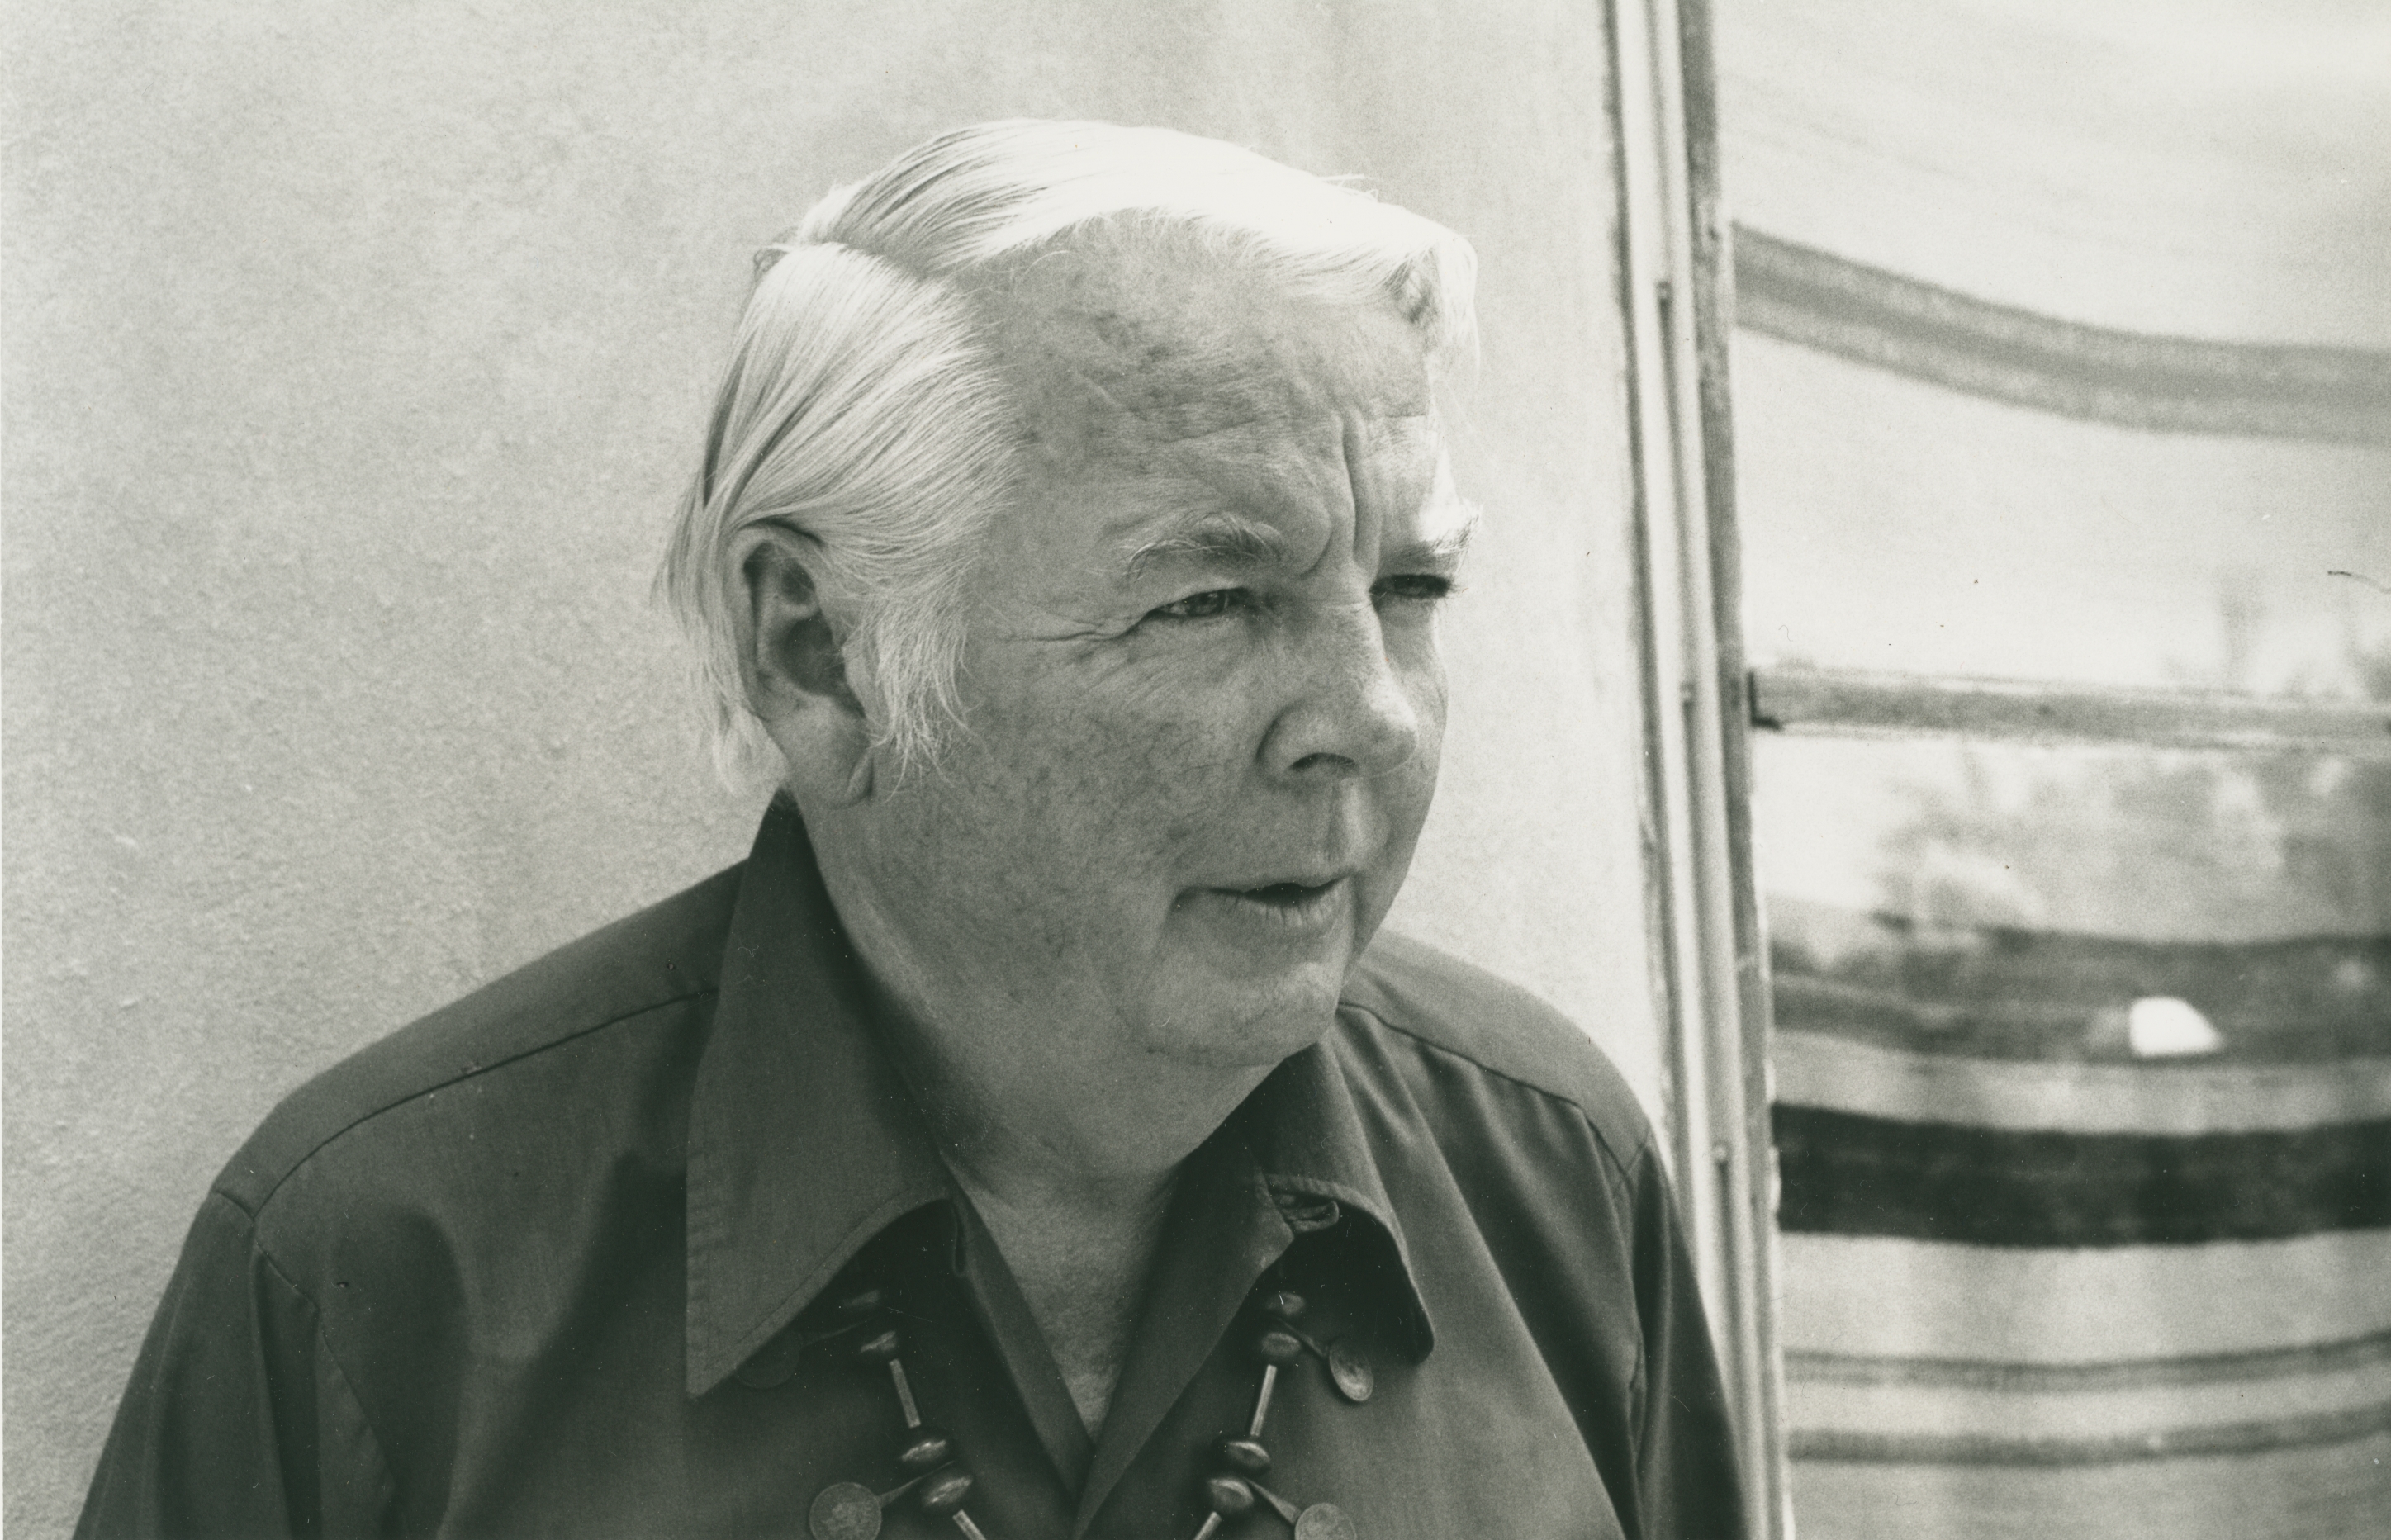 Lee Mullican in Taos, New Mexico